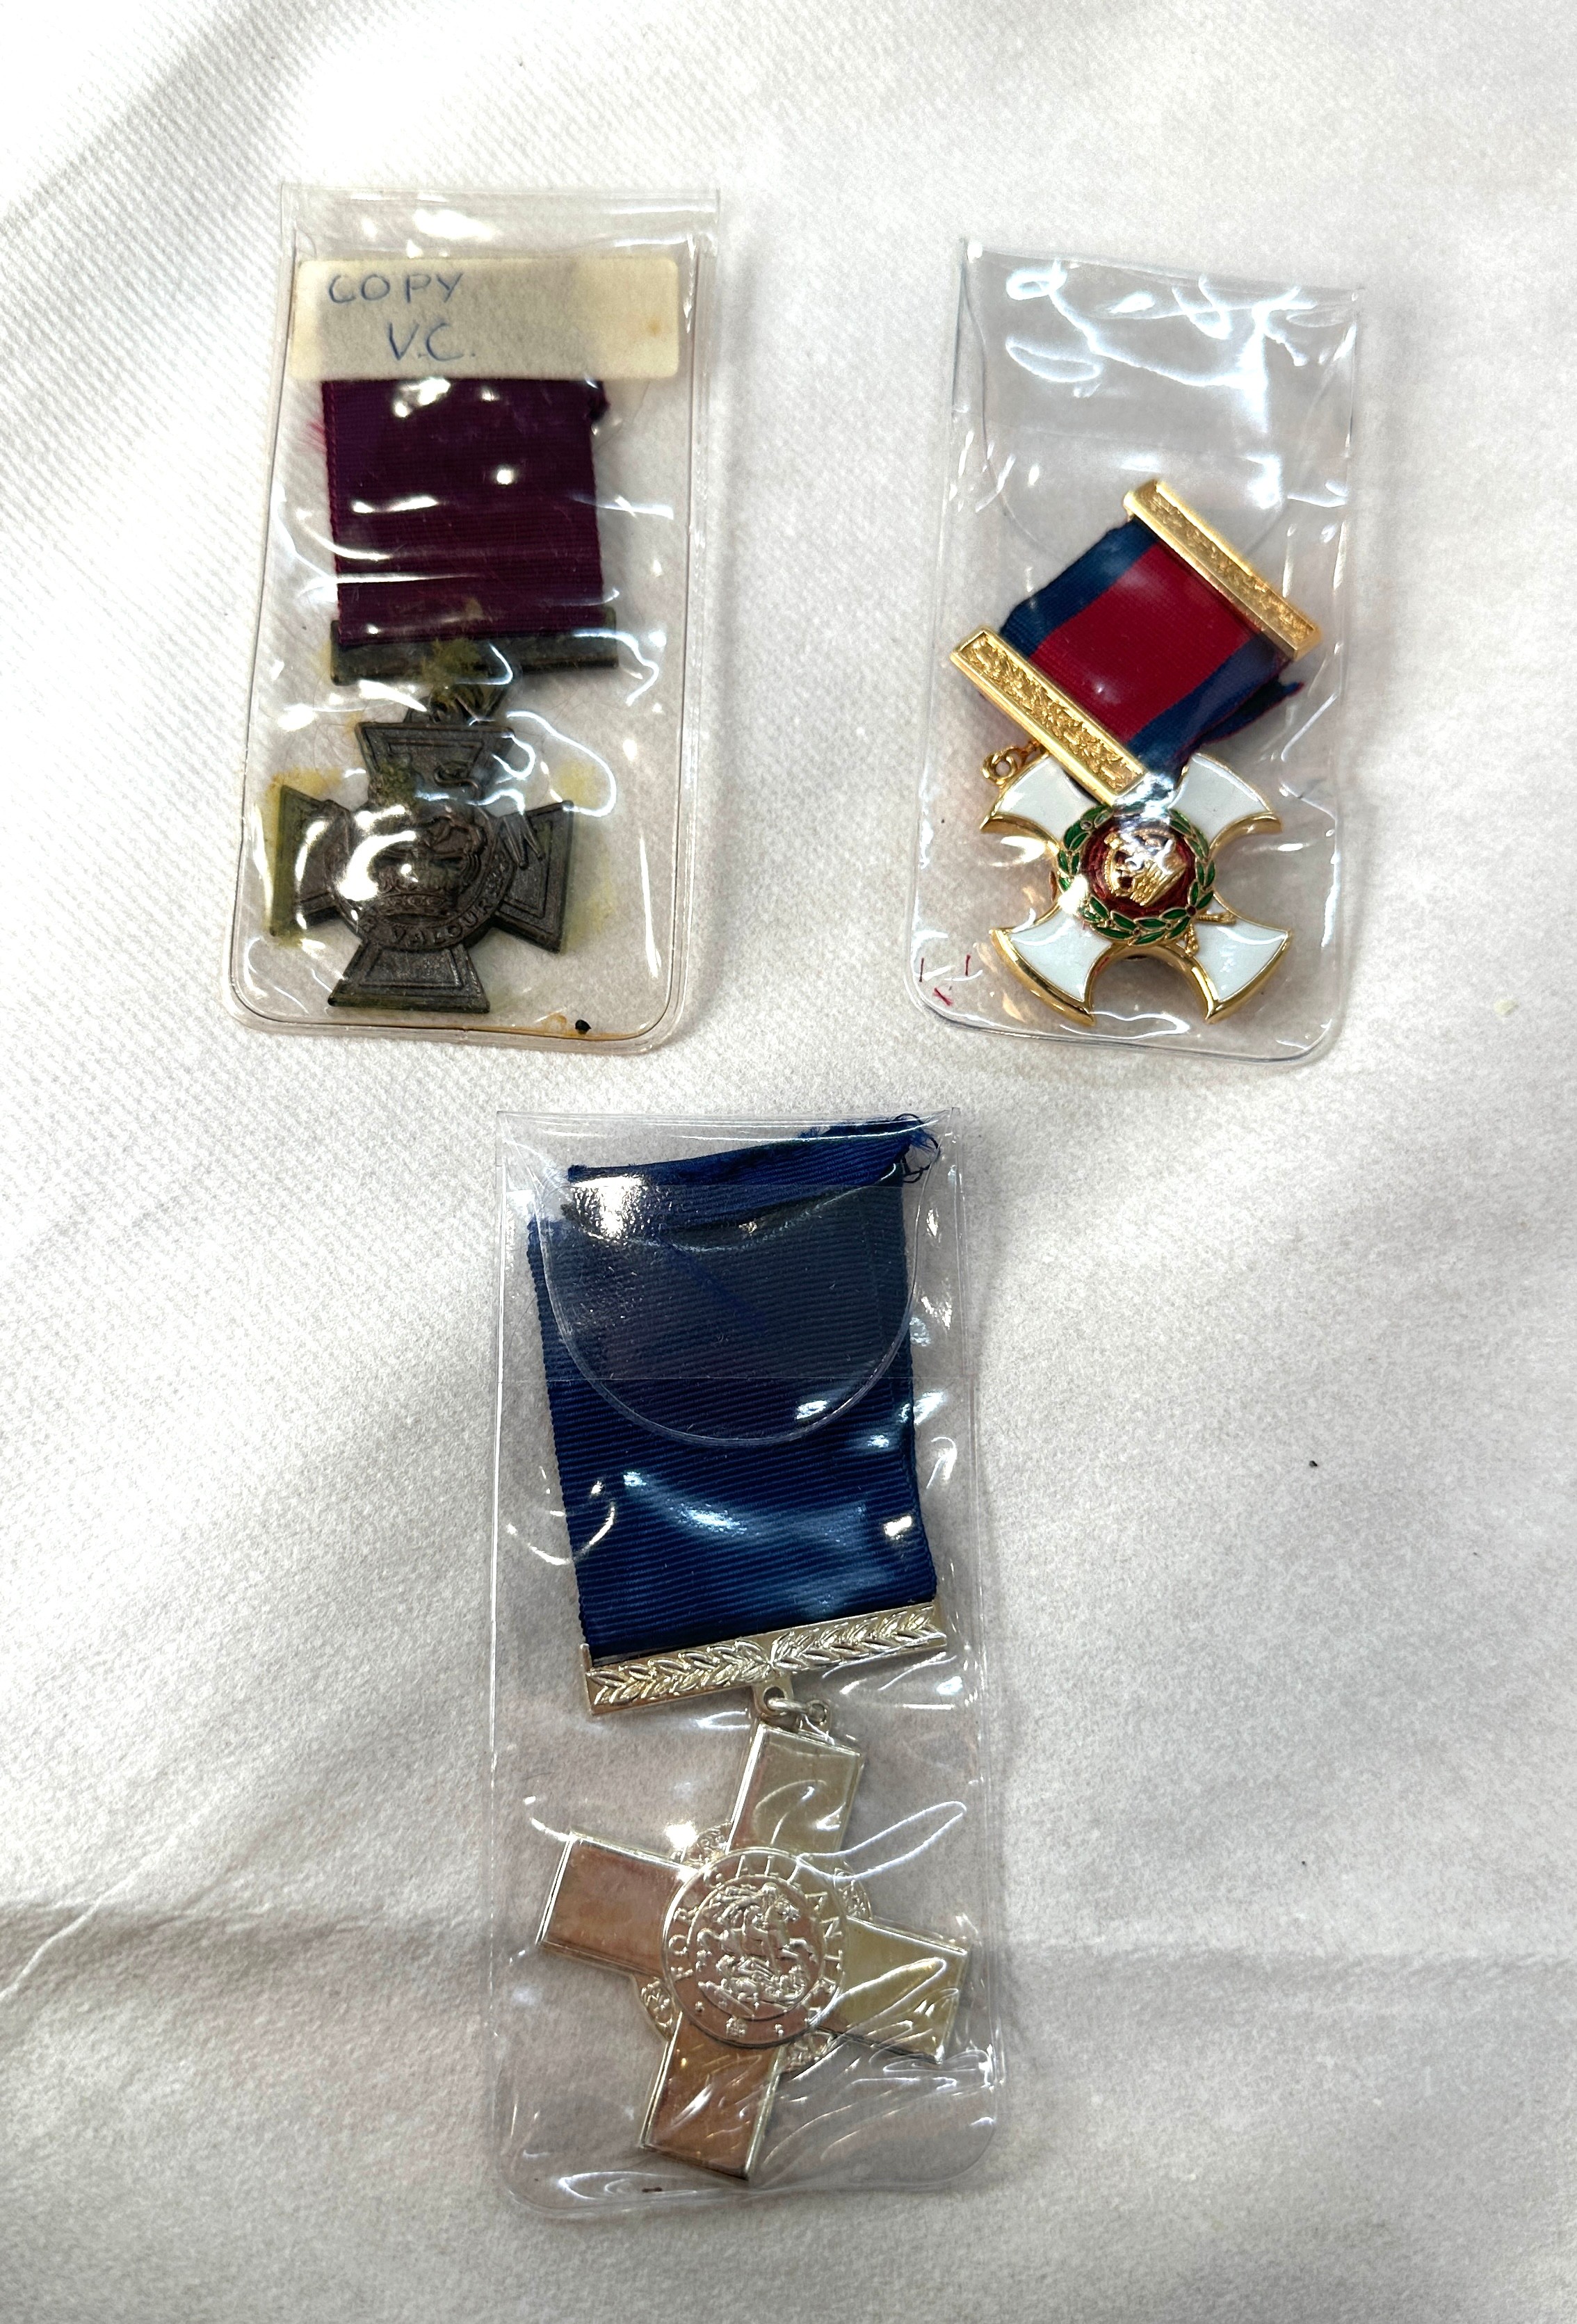 Three superb replica british gallantry medals, victoria cross, george cross and Distinguished